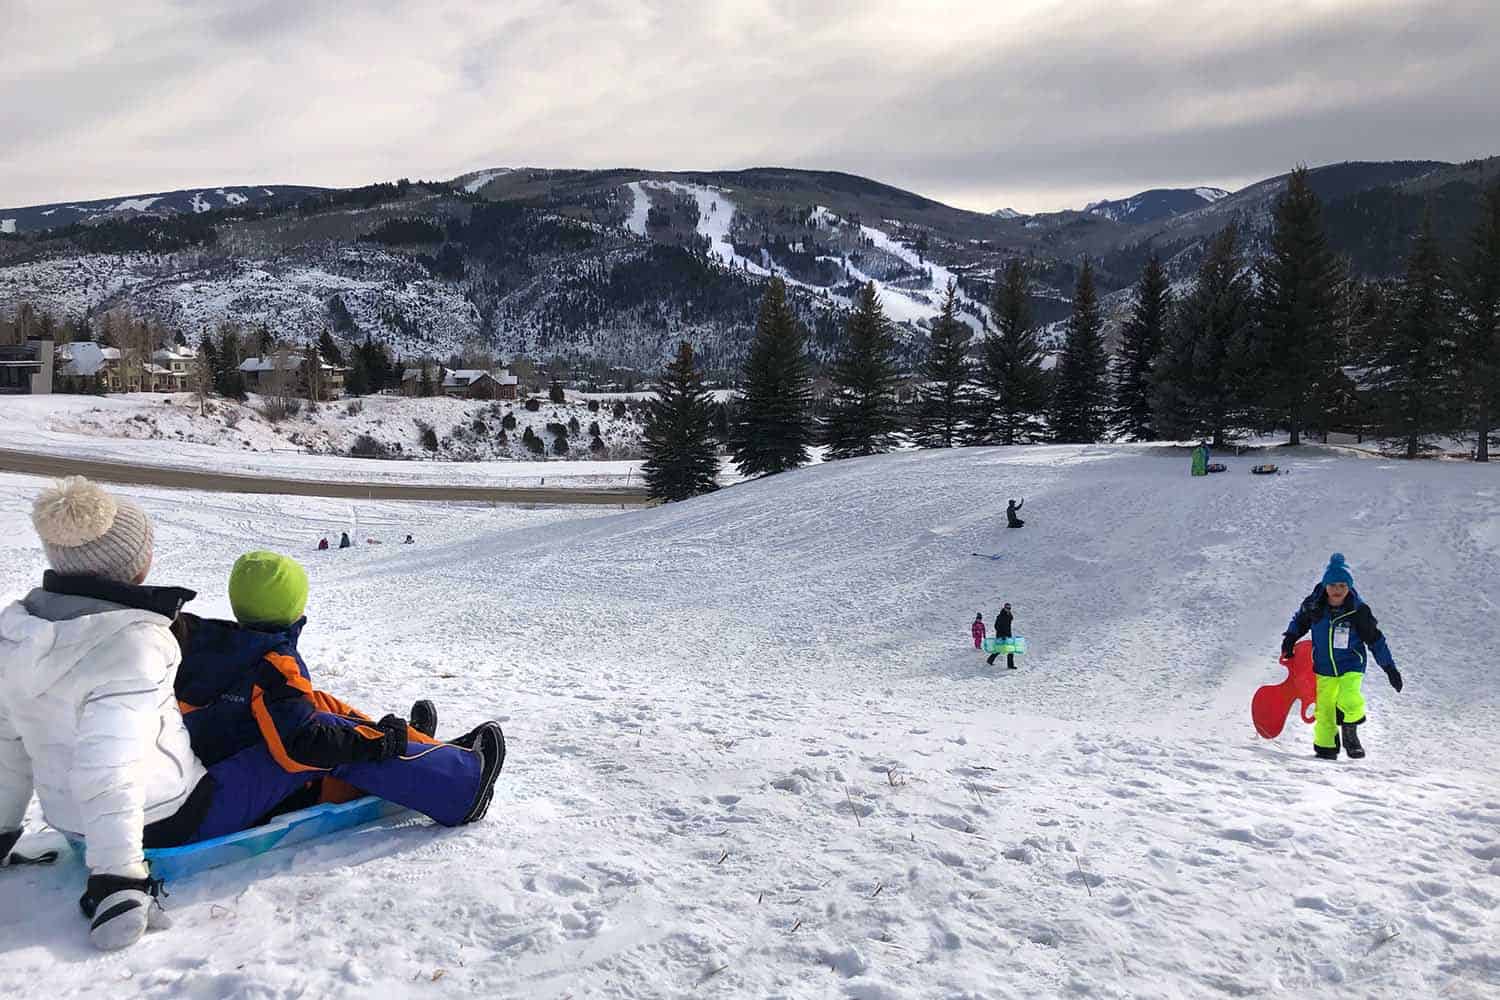 Families sledding down a snow-covered hill